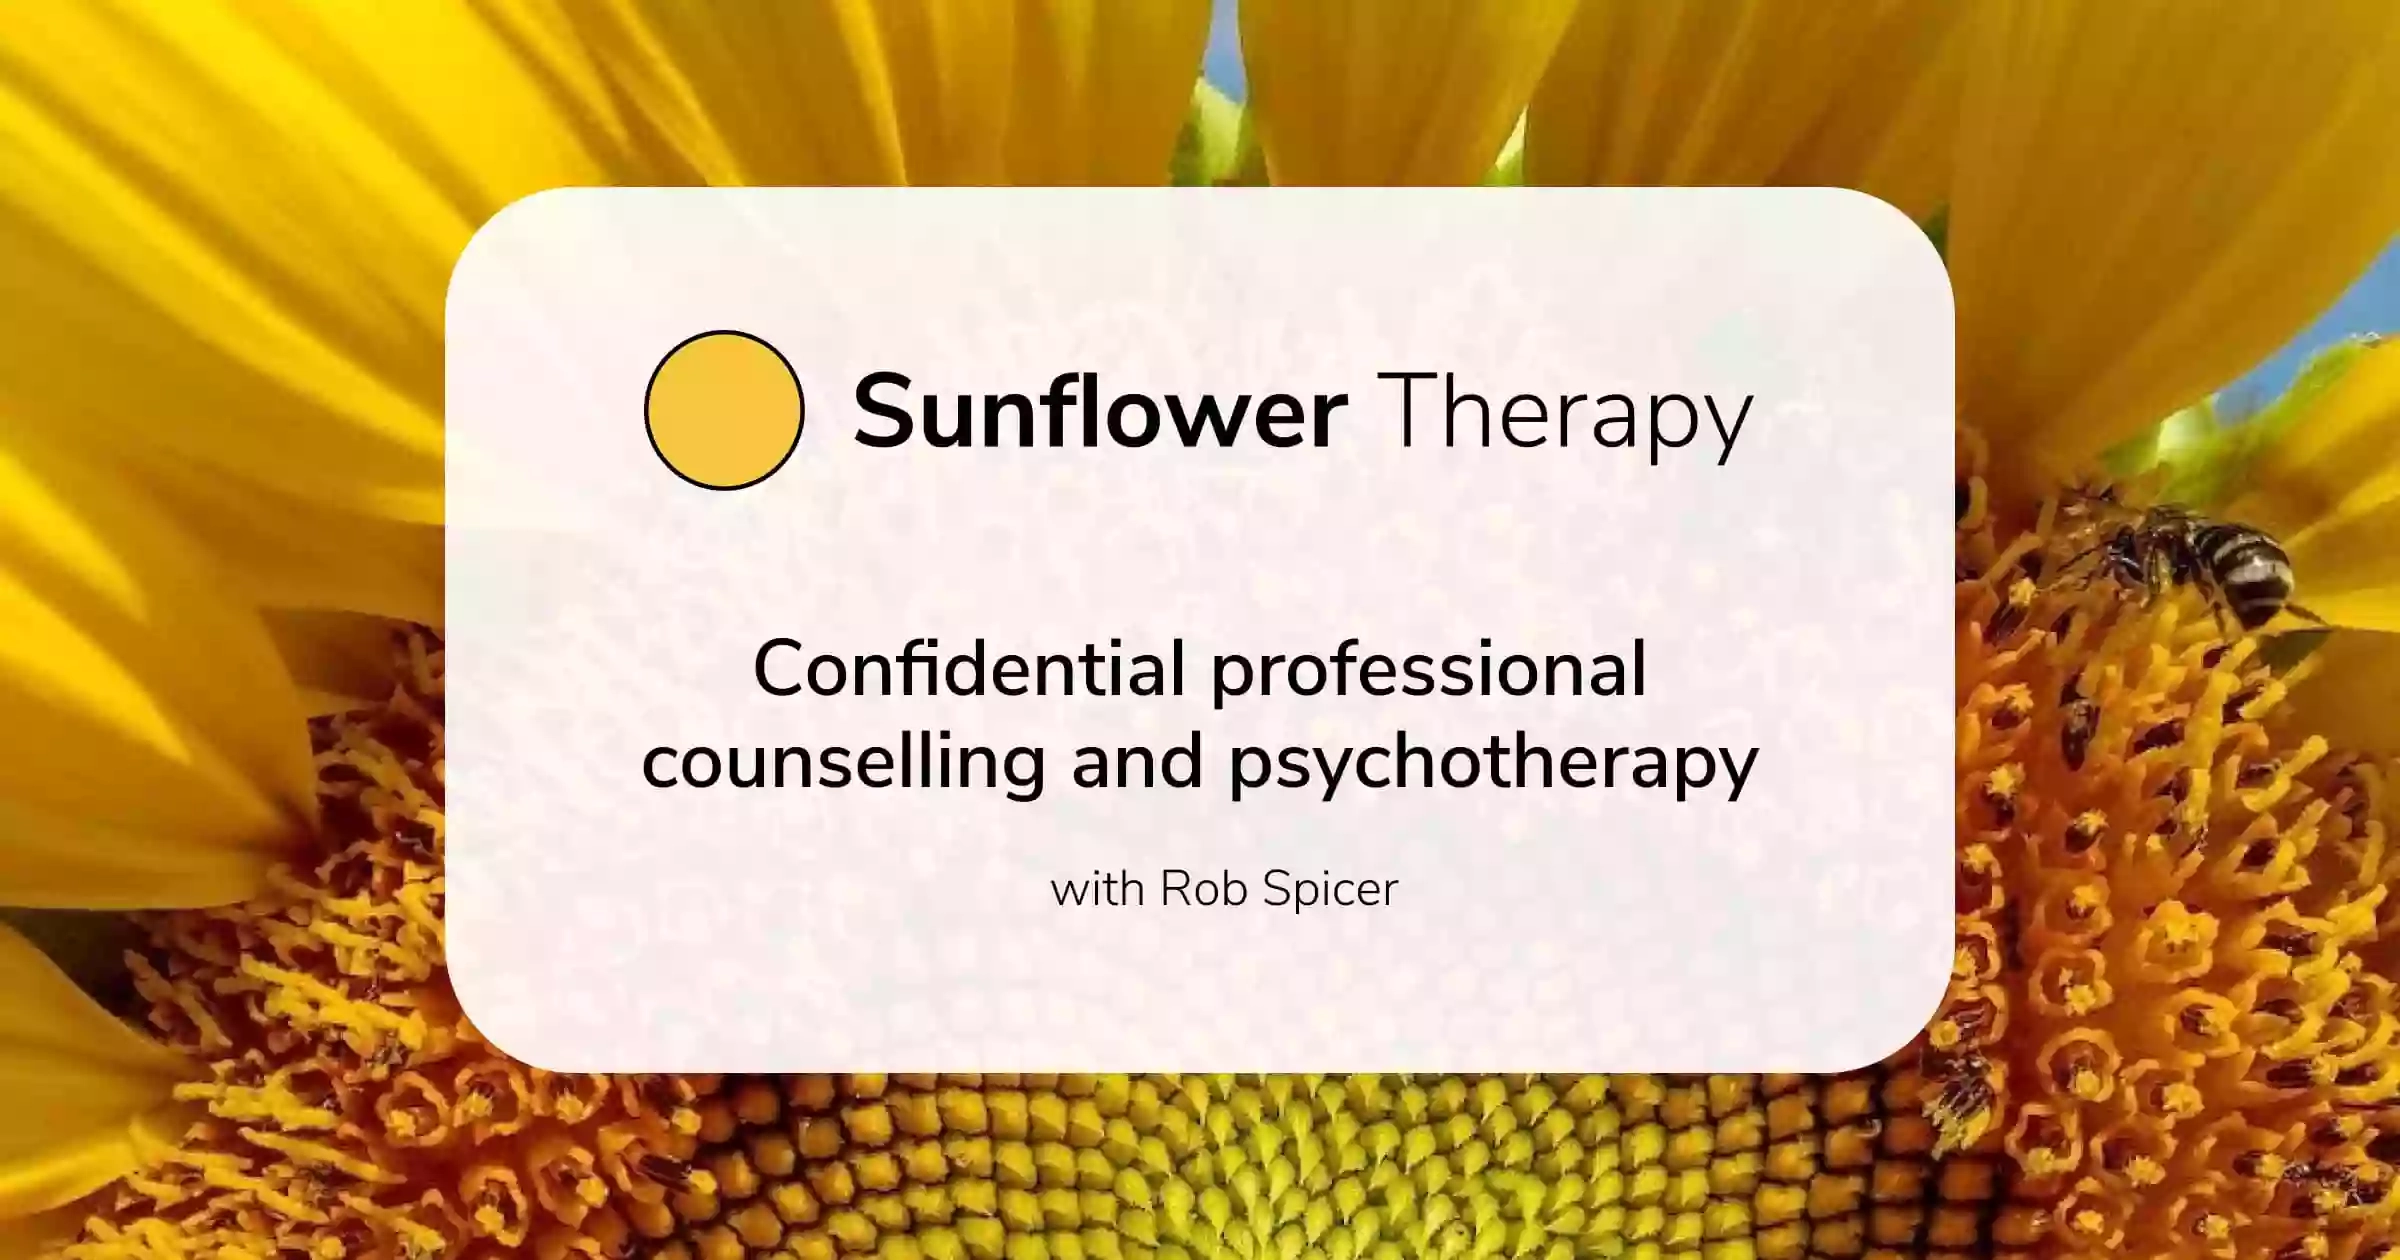 Sunflower Therapy